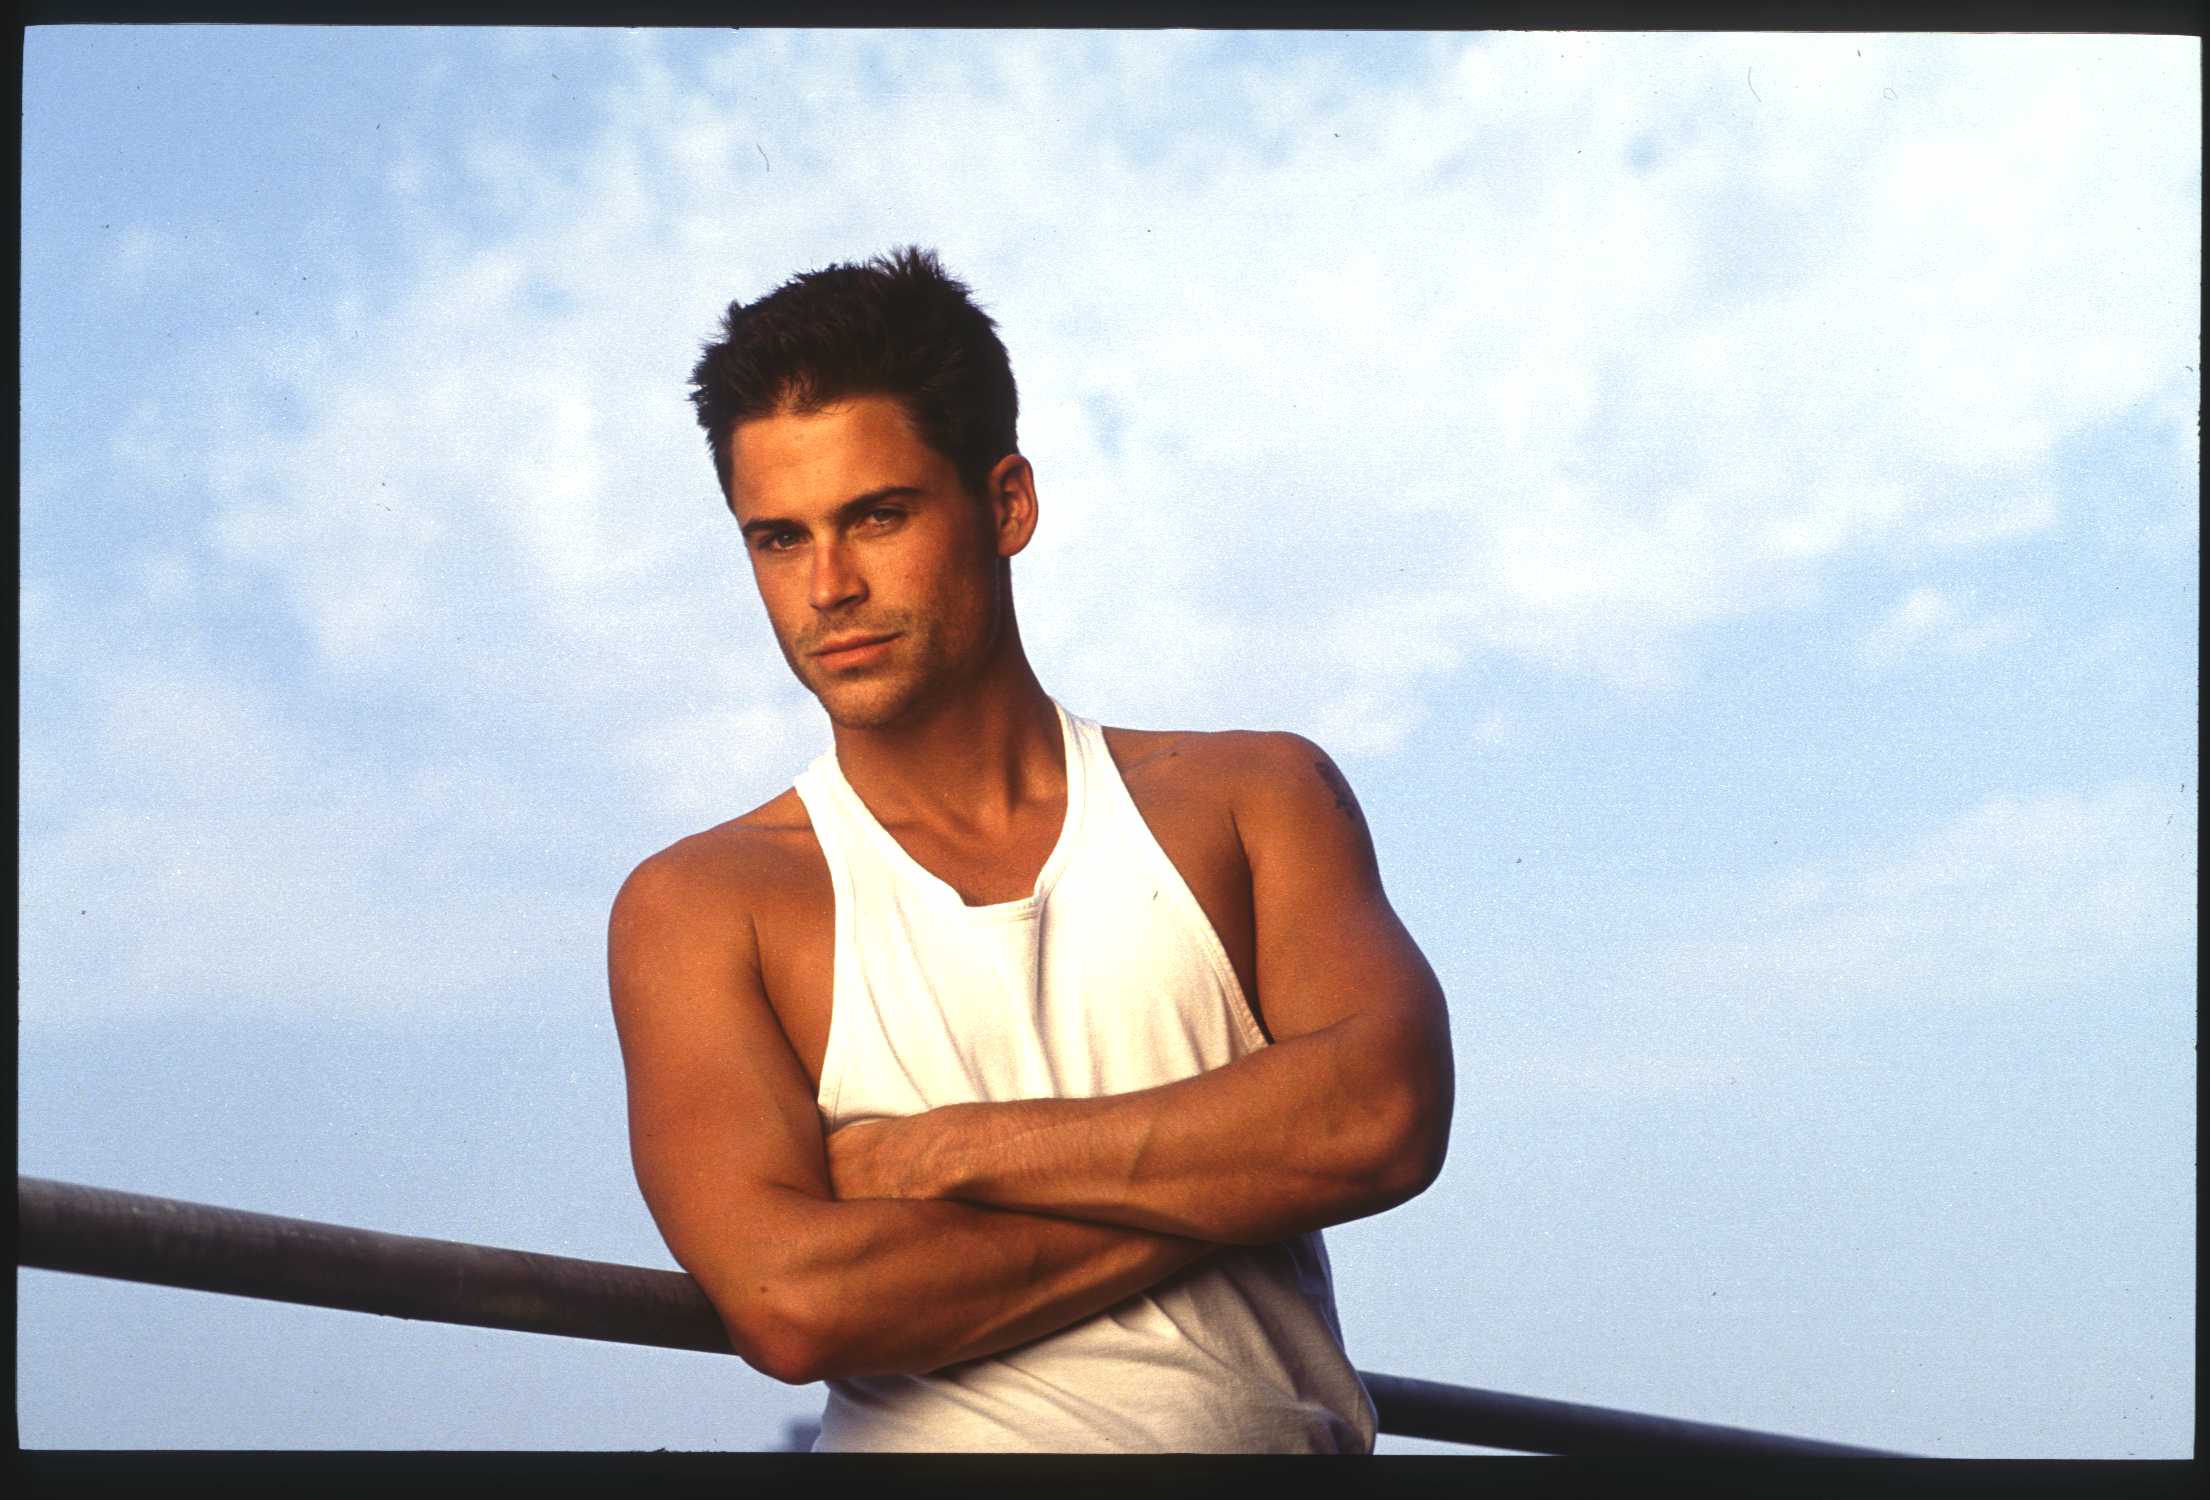 Young Rob Lowe in a white shirt